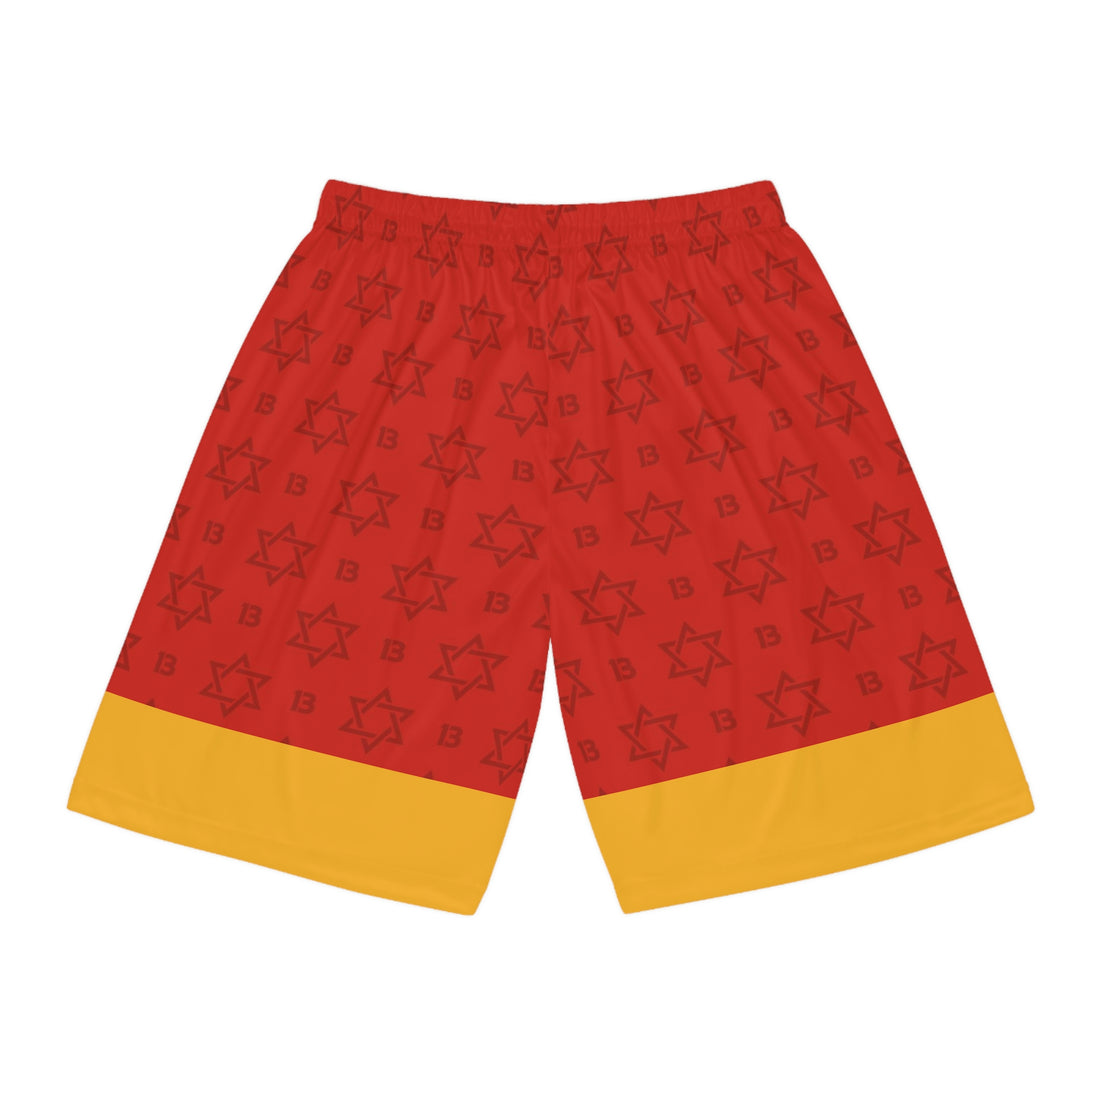 Father Yod's Team Red Shorts